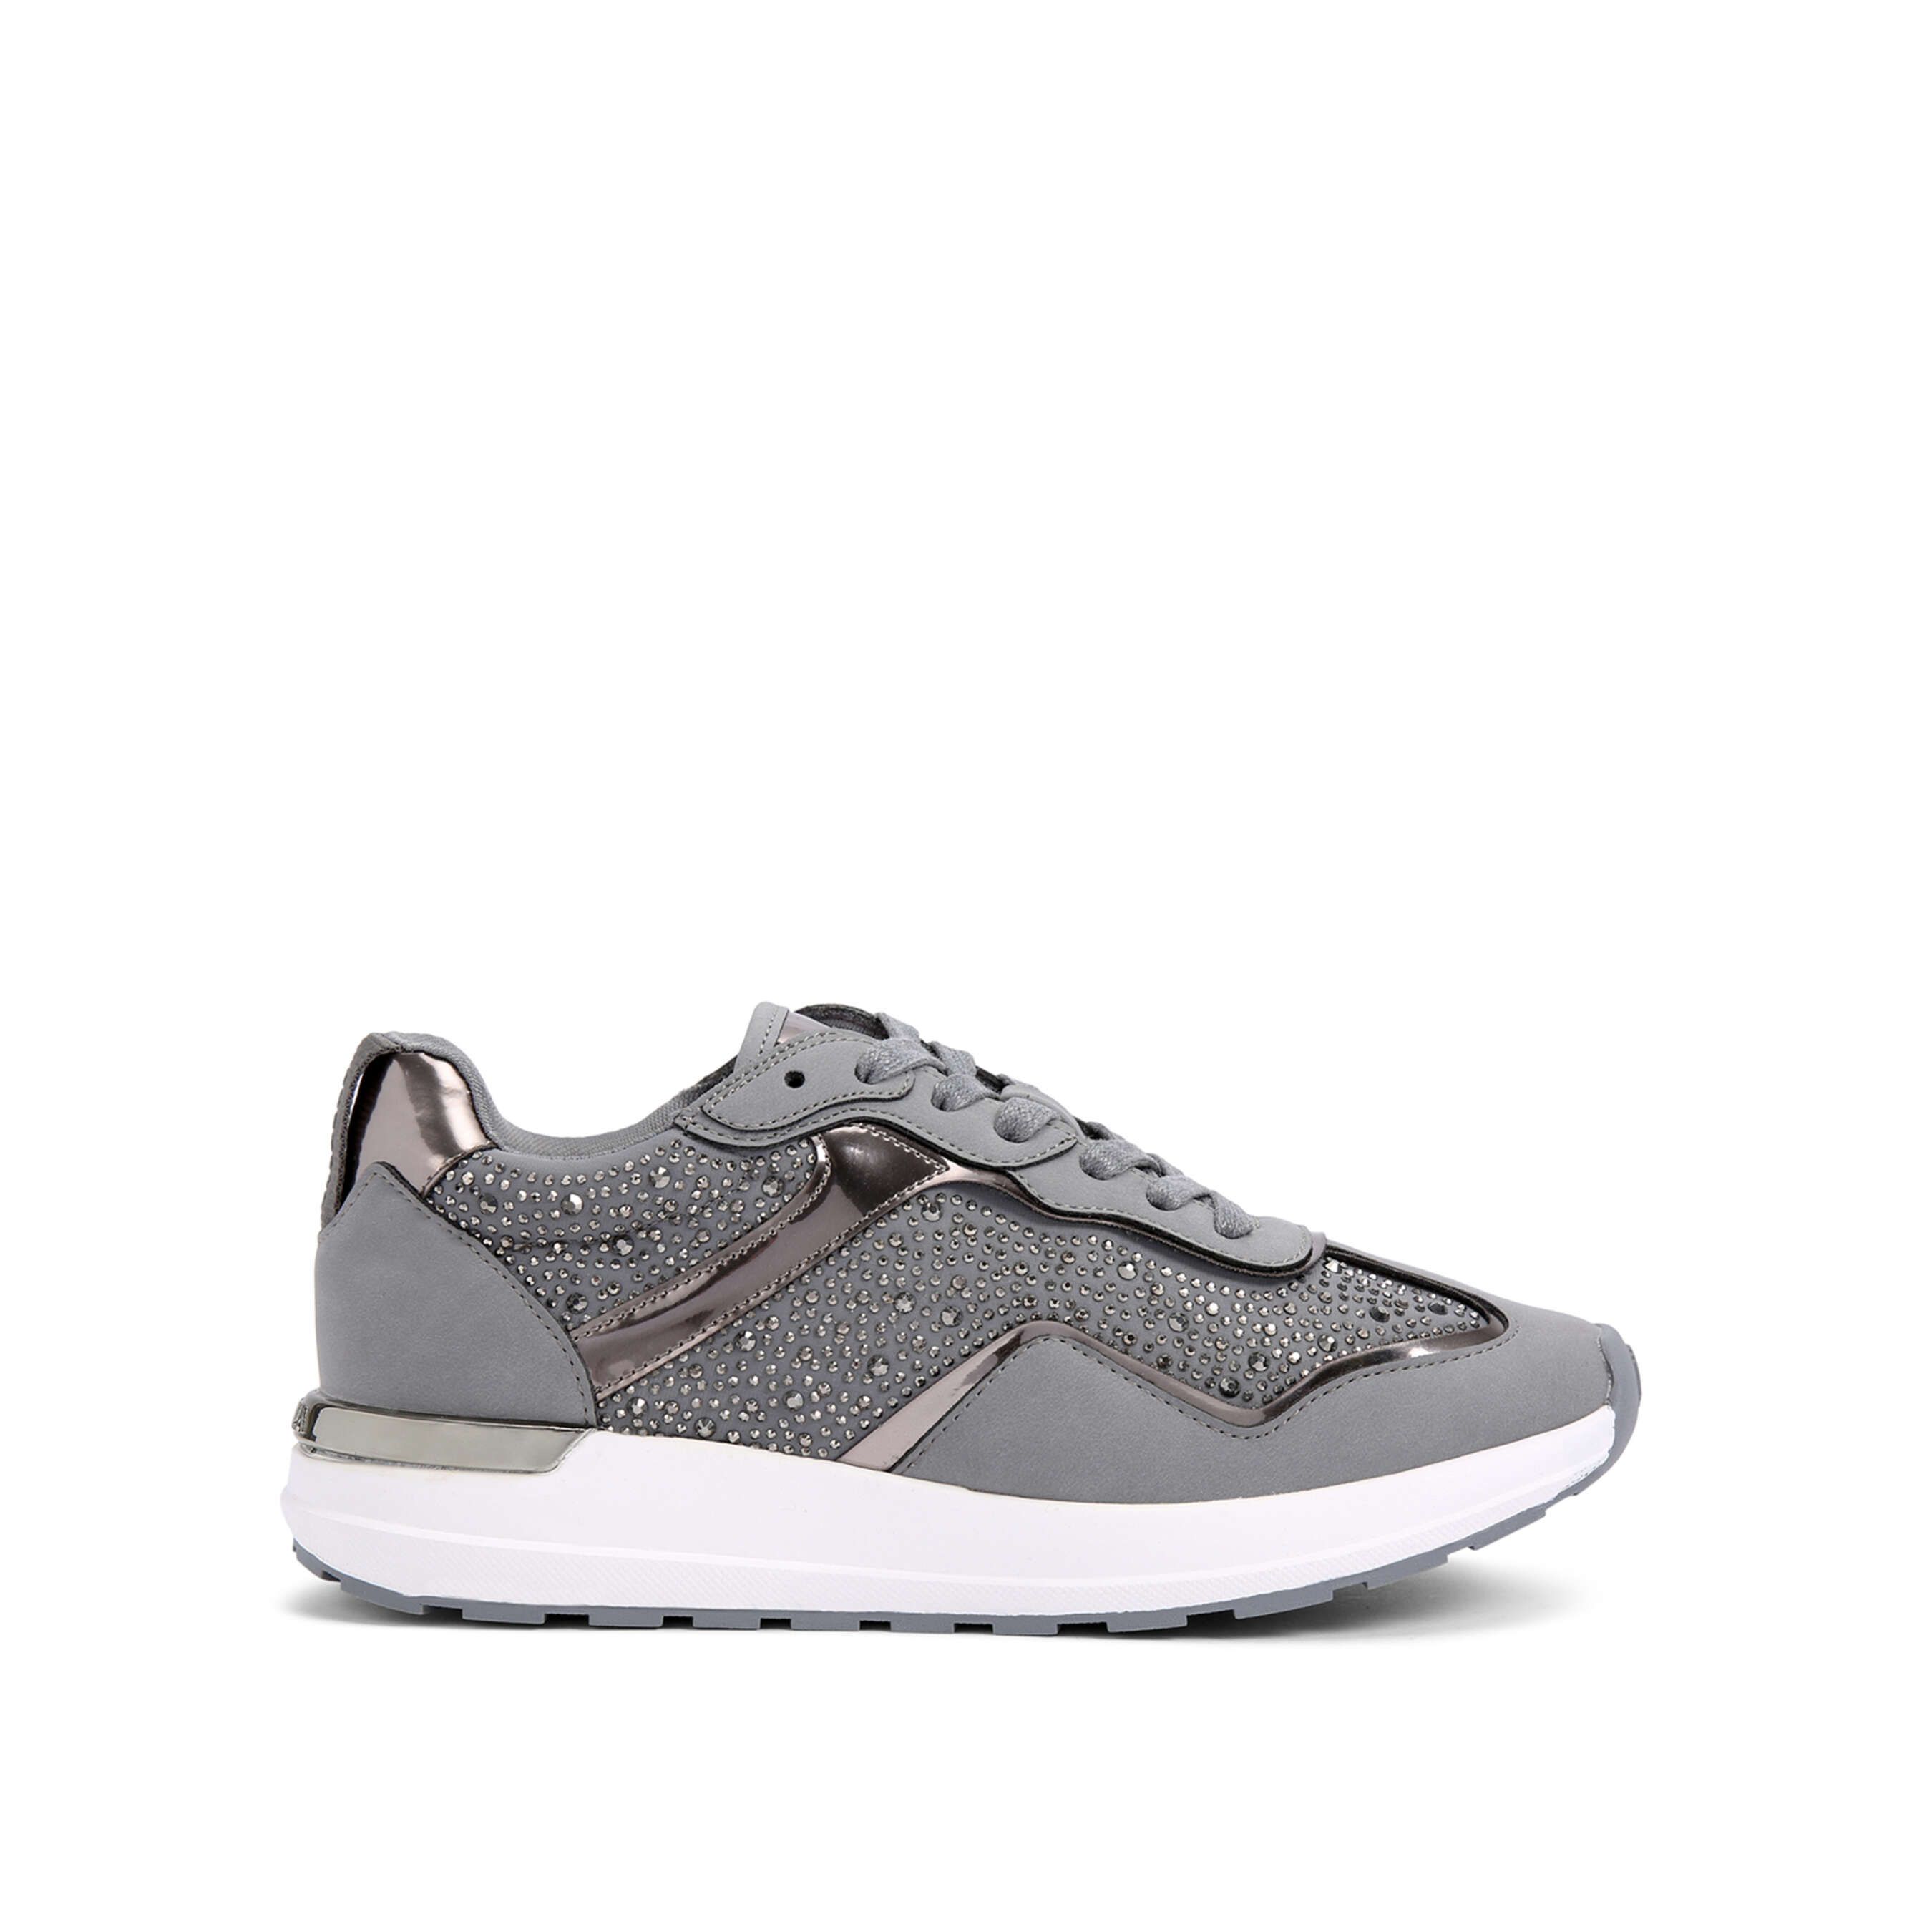 The Blink Jogger features a grey upper with crystal embellishment. There is a silver branded plate at the back of the ankle and the sole is in white.